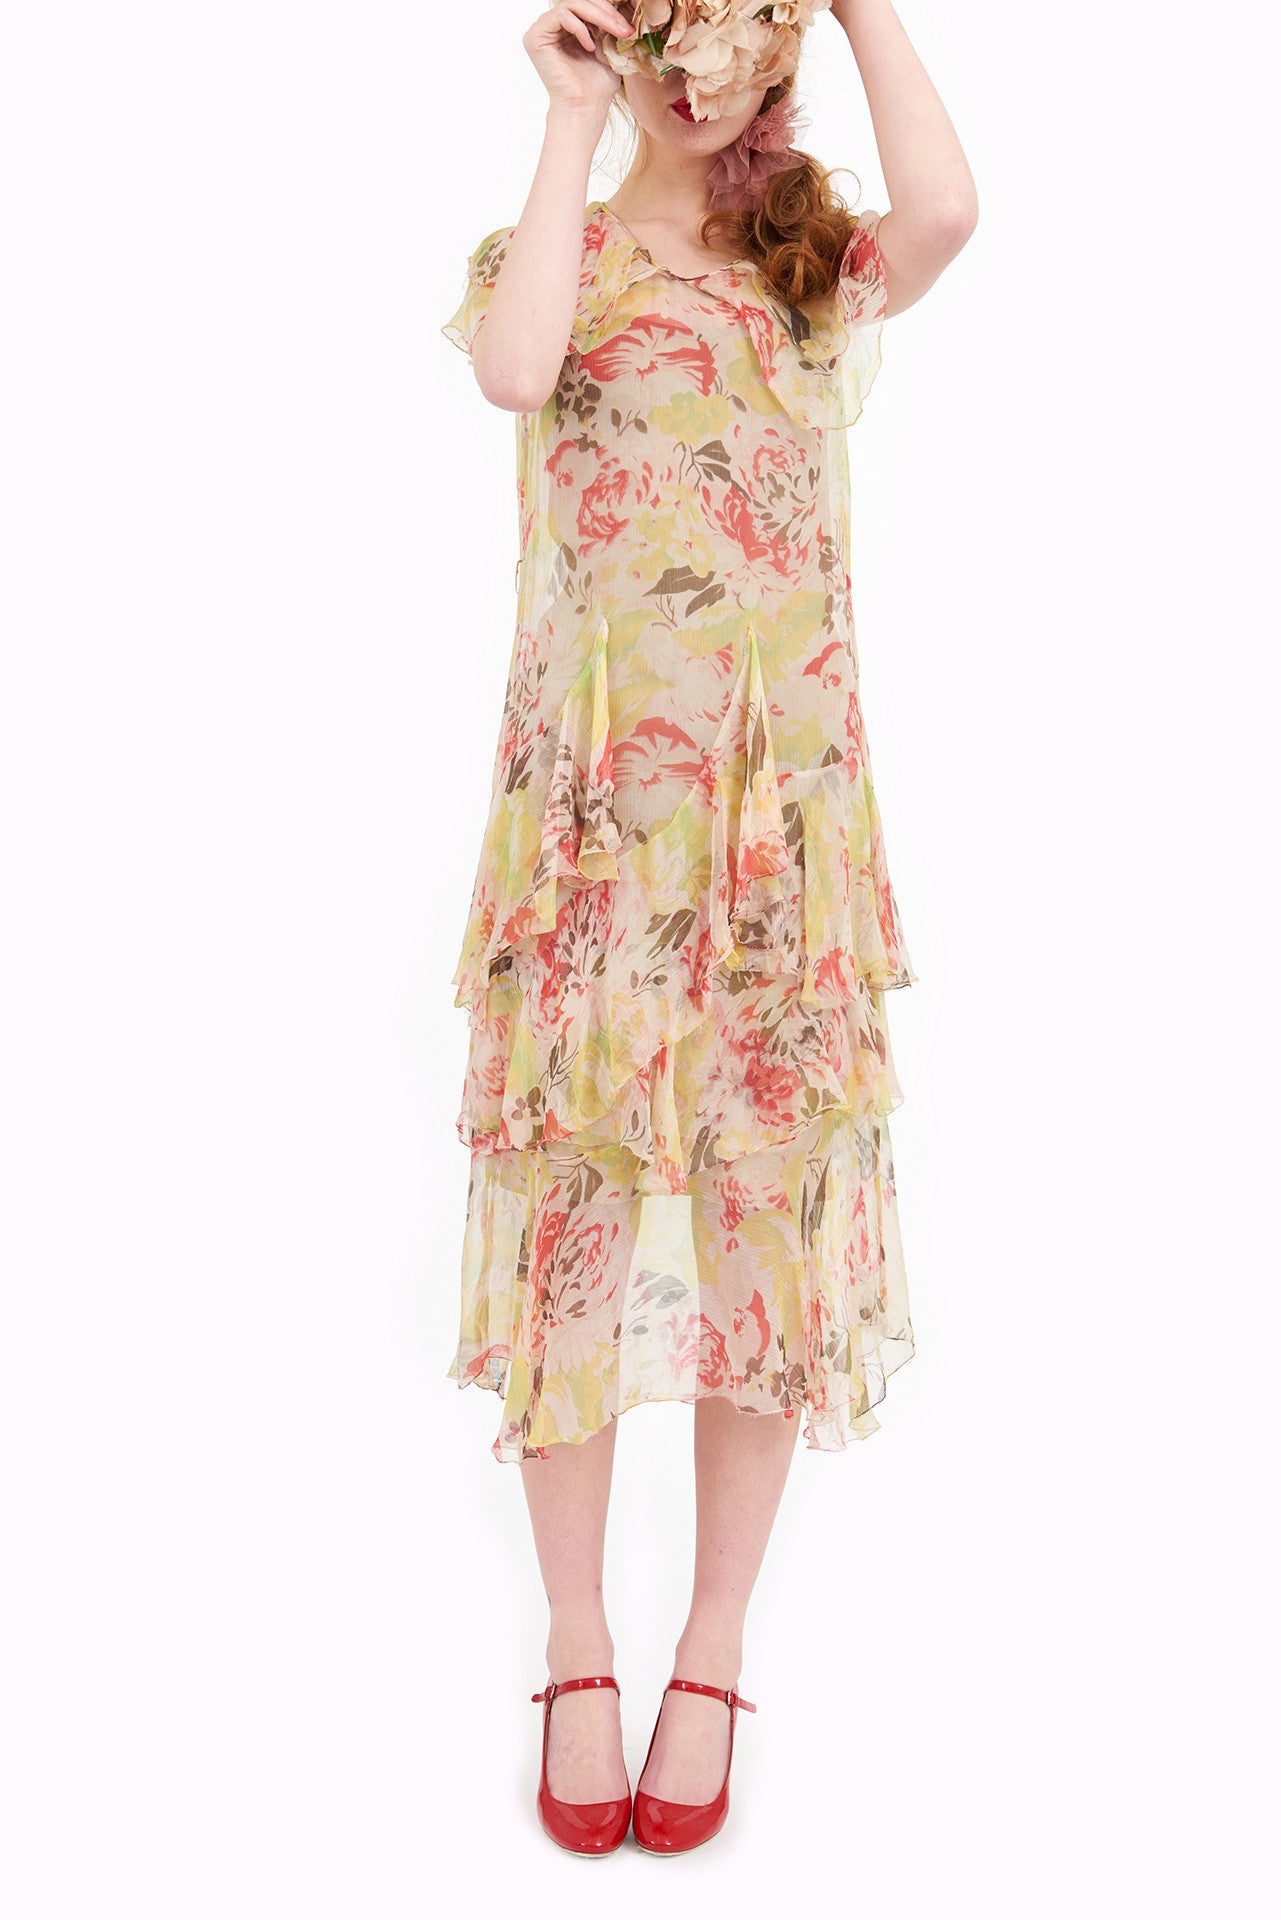 Afternoon Tea Chiffon Floral Frock